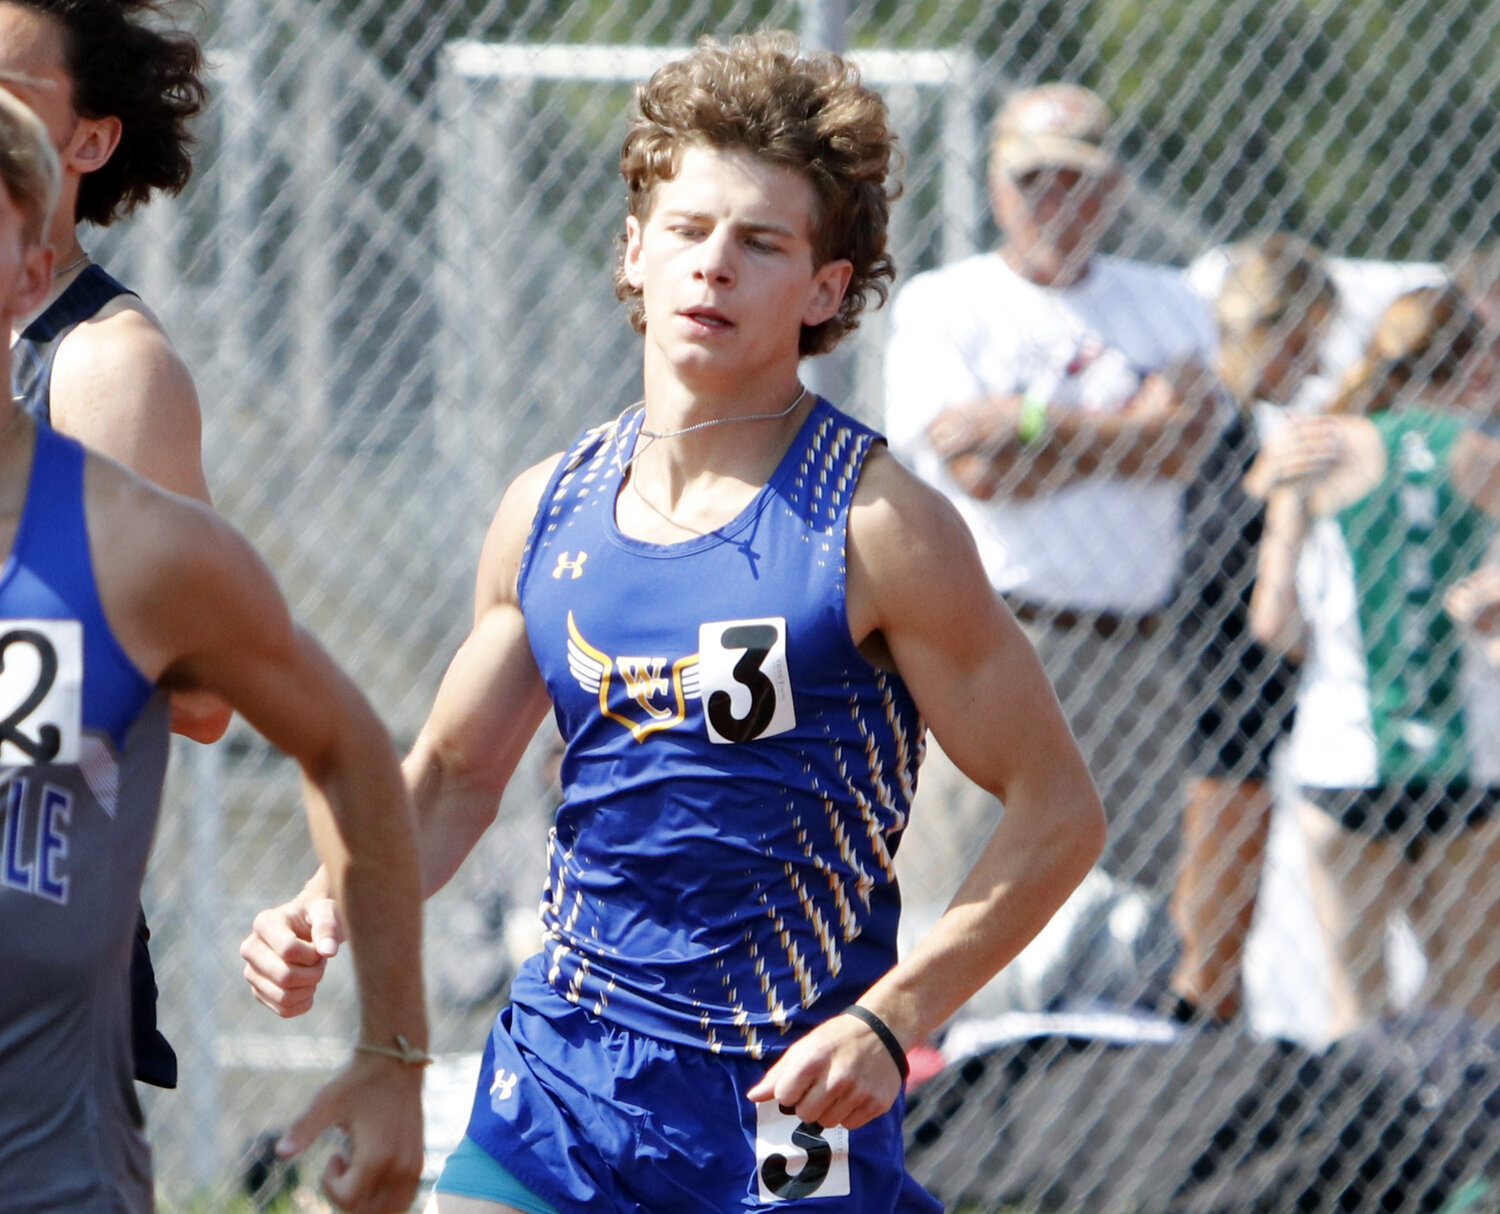 David Riggs competes in the Class 3 800-meter run.